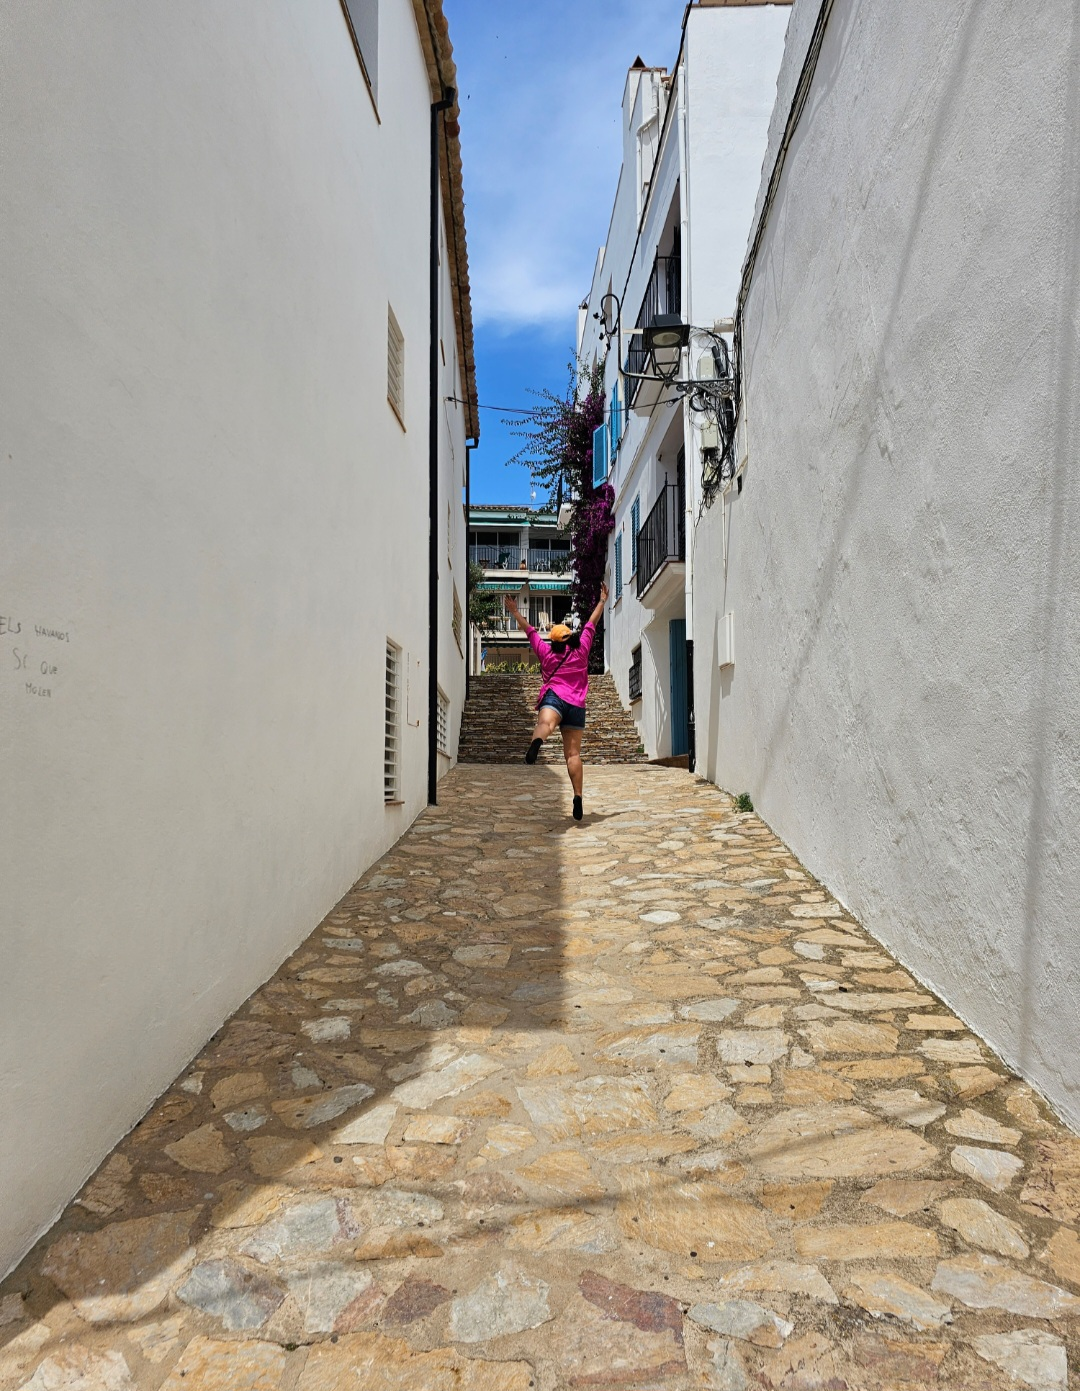 A person running down a narrow alley

Description automatically generated